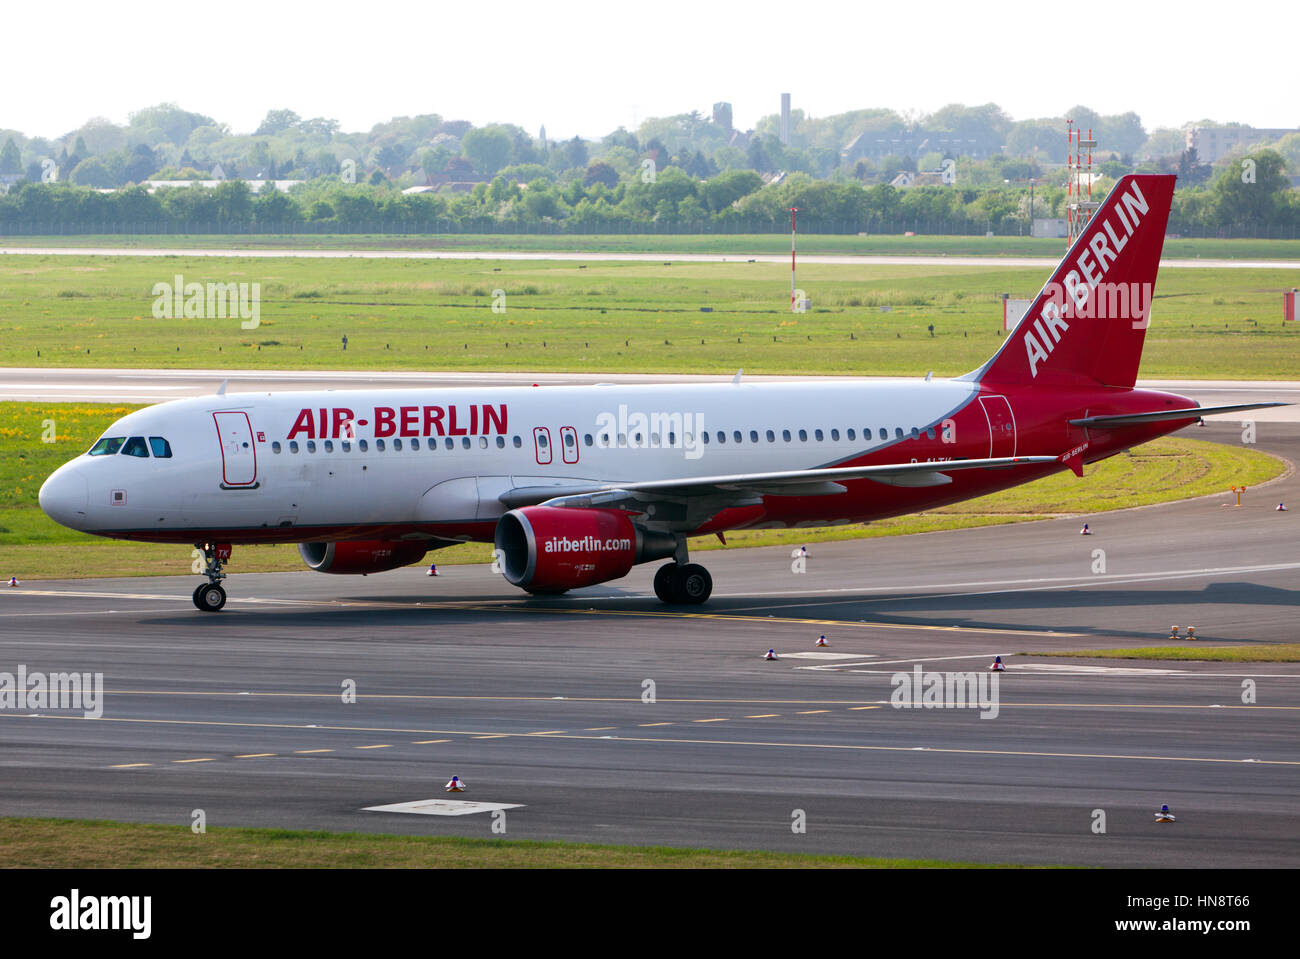 Air Berlin Airbus after landing on DUS Airport Stock Photo